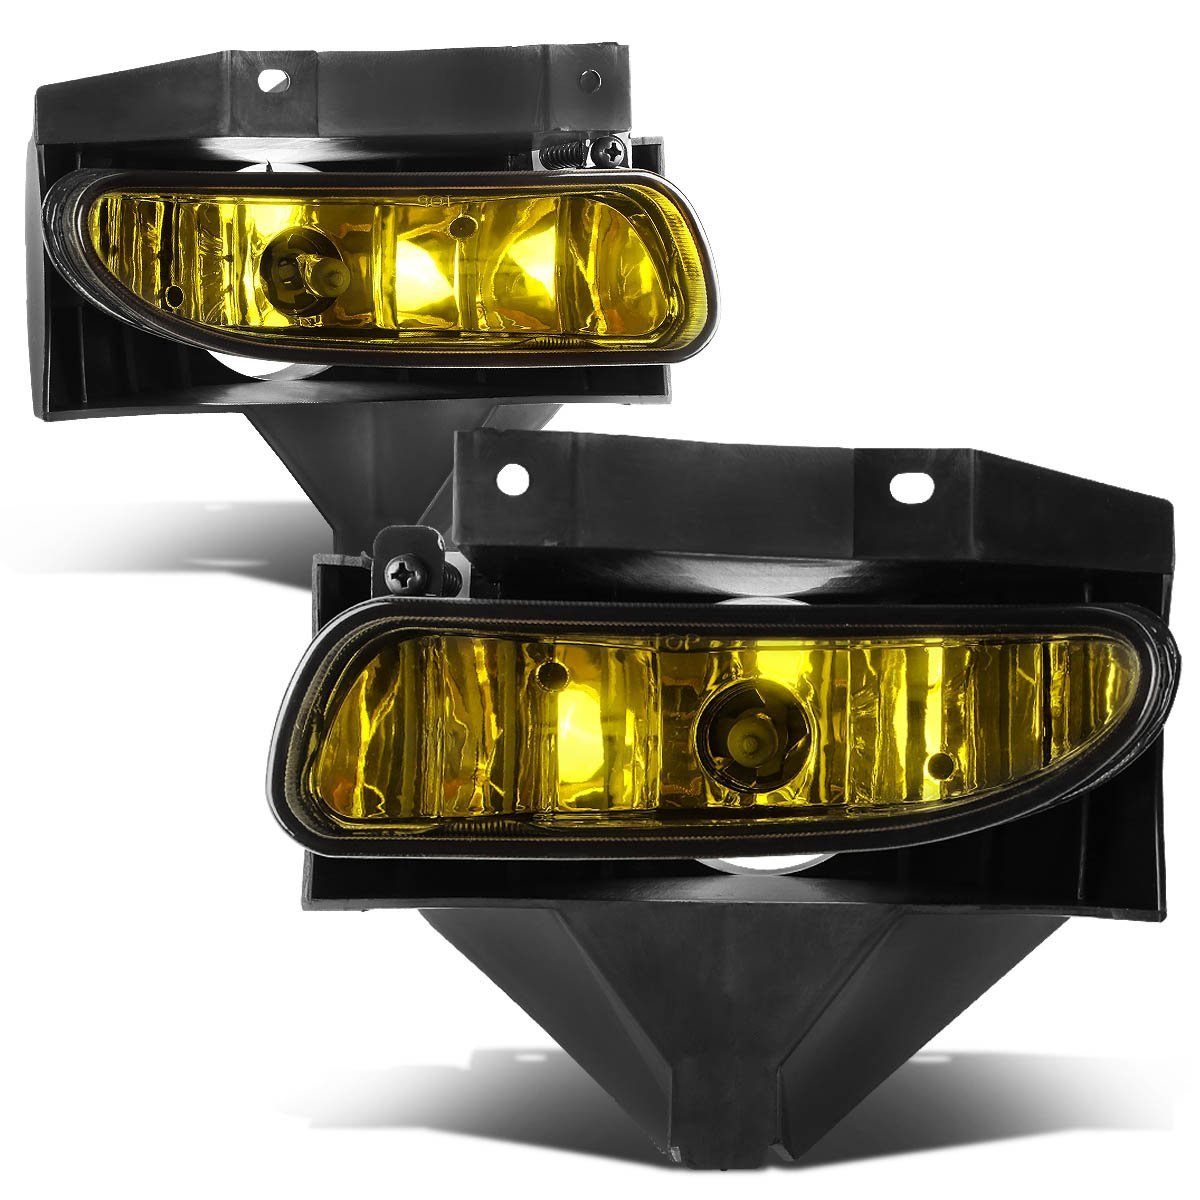 Ford Mustang New Edge Pair of Bumper Driving Fog Lights